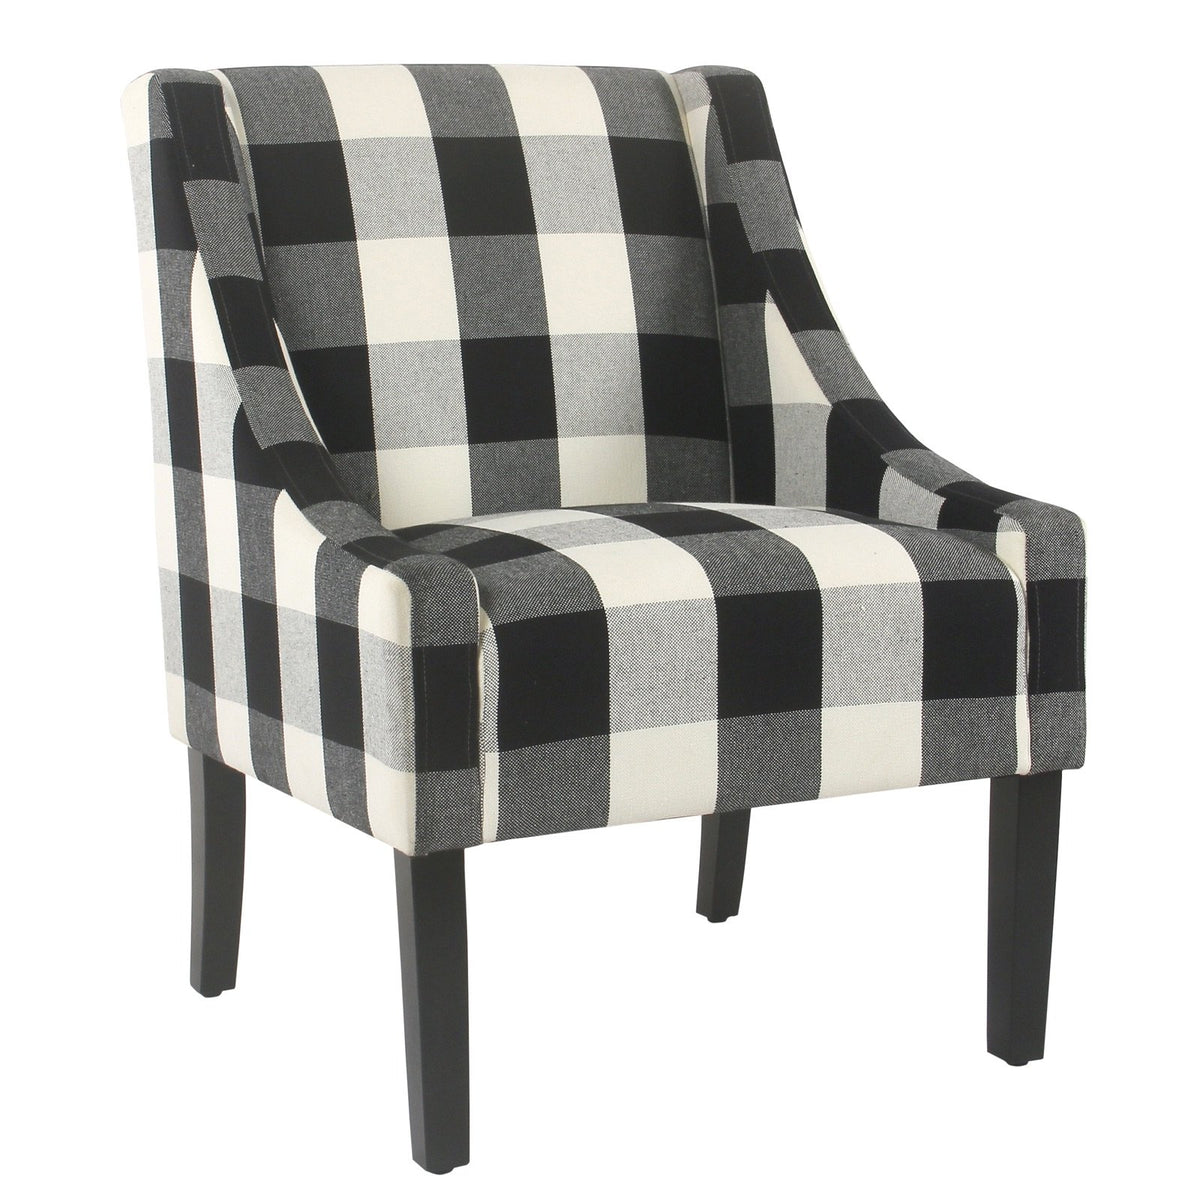 BM194045 - Fabric Upholstered Wooden Accent Chair with Buffalo Plaid Pattern, Black and White